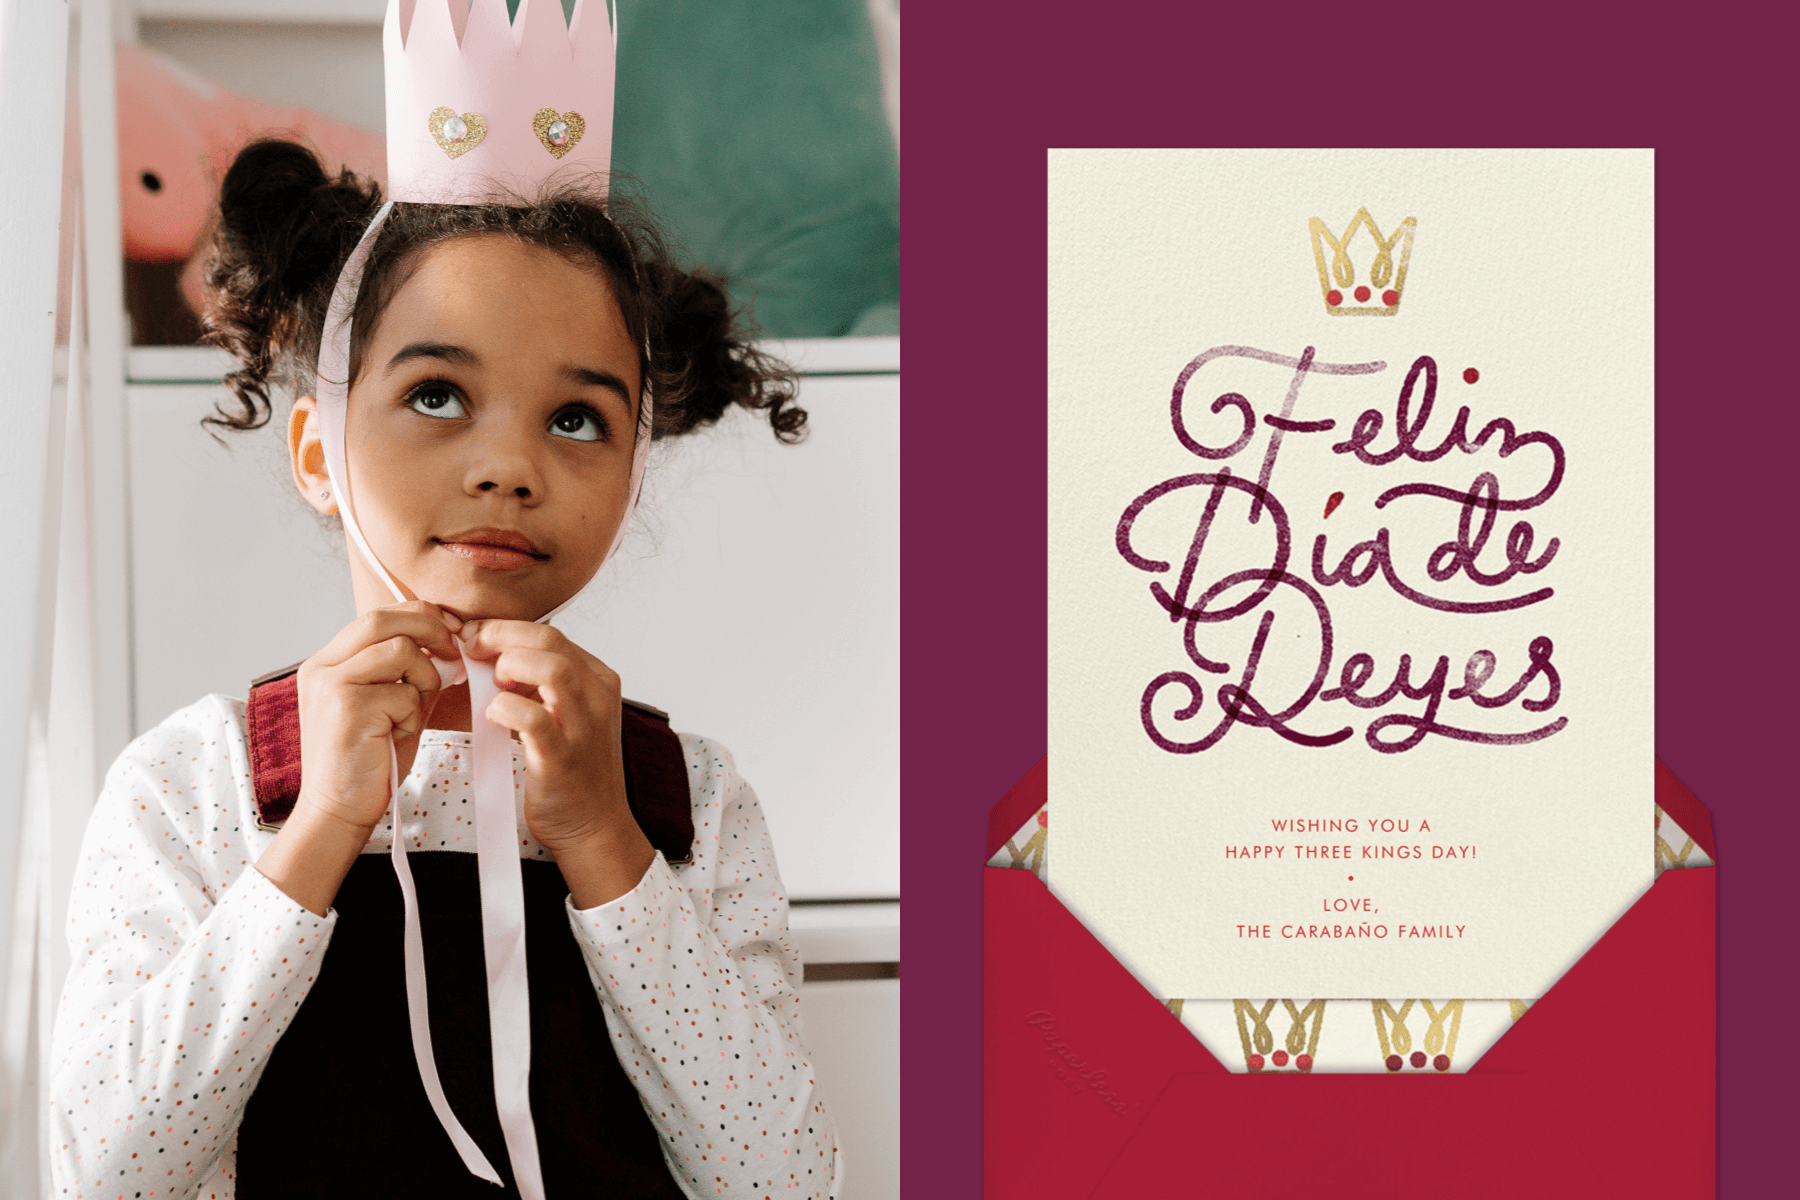 left: A young girl ties a paper crown onto her head. Right: A Dia de Reyes card with a small crown and script. 